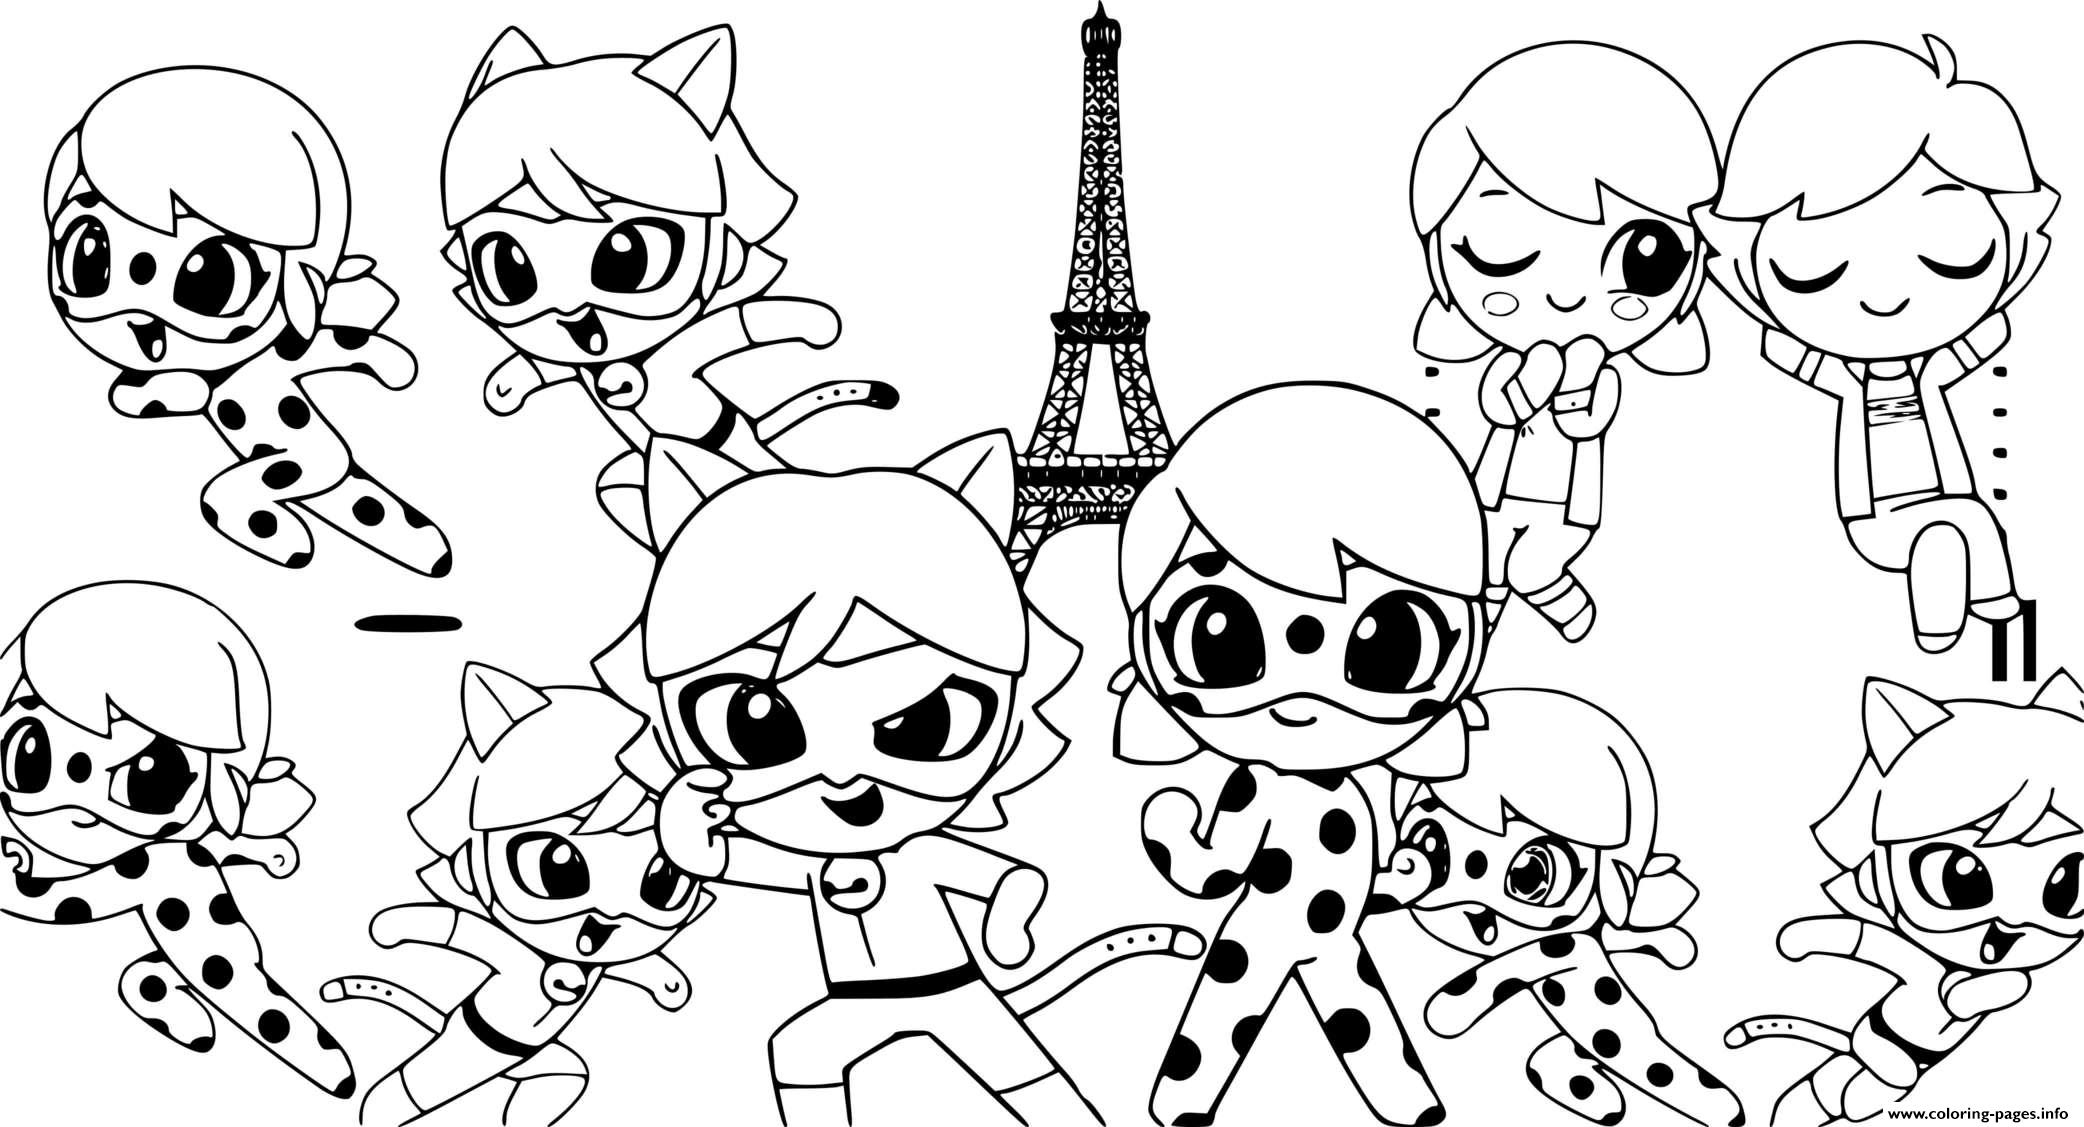 Ladybug And Cat Noir Kwami Coloring Pages / Ladybug Und Cat Noir dedans Coloriage Chat Noir